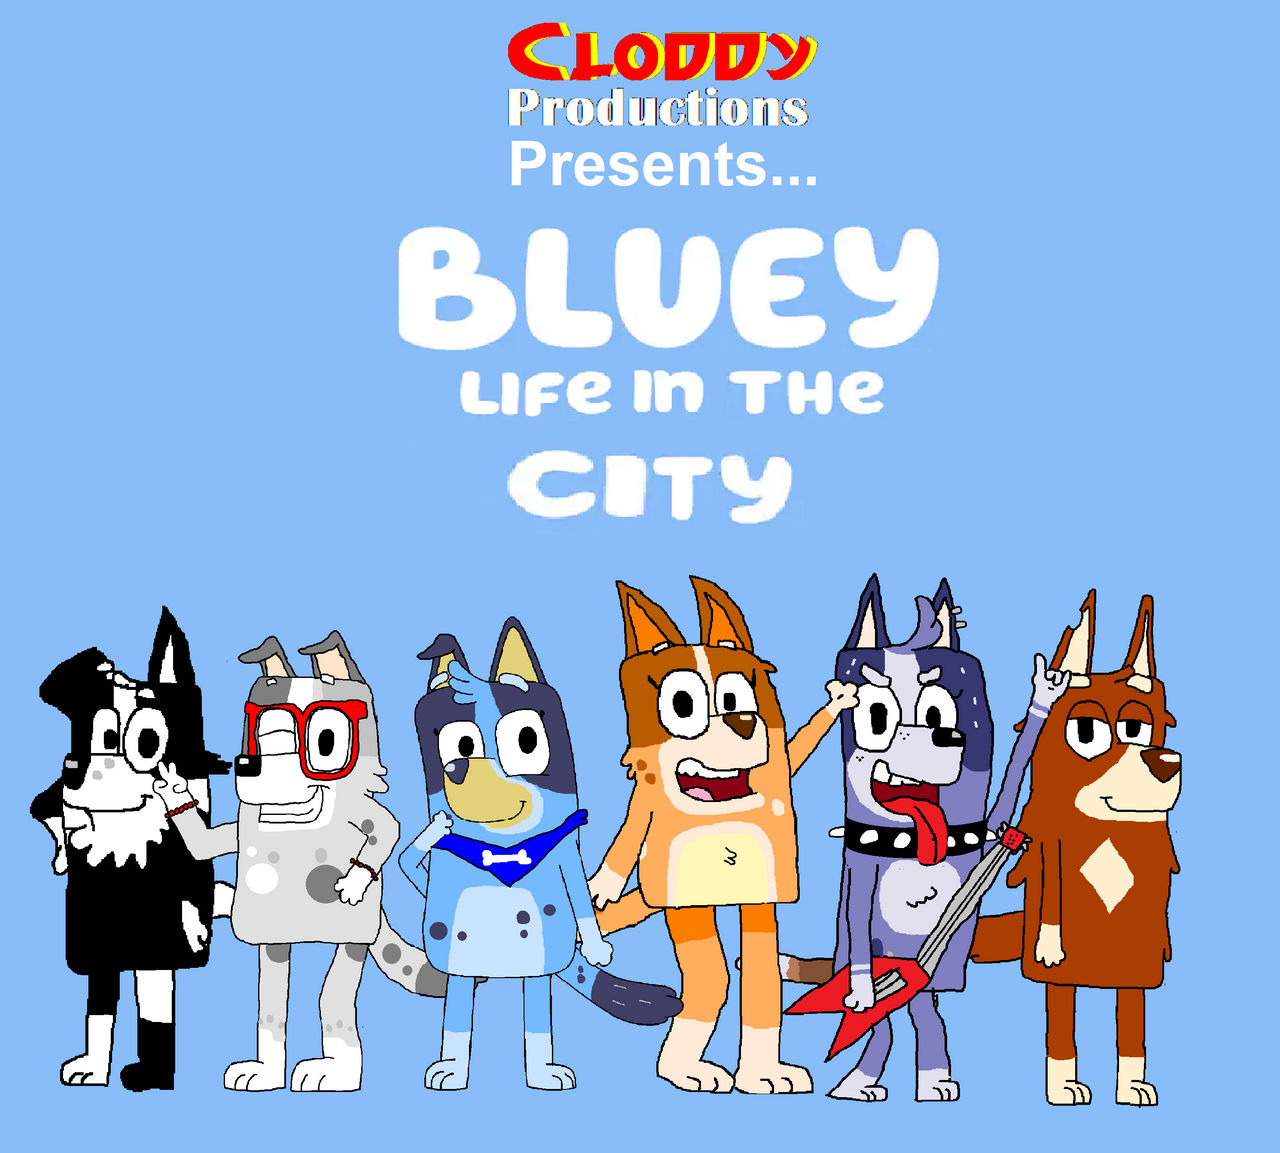 Bluey And Bingo, WHY DON'T YOU PLAY WITH US? by YeT-Ice on DeviantArt